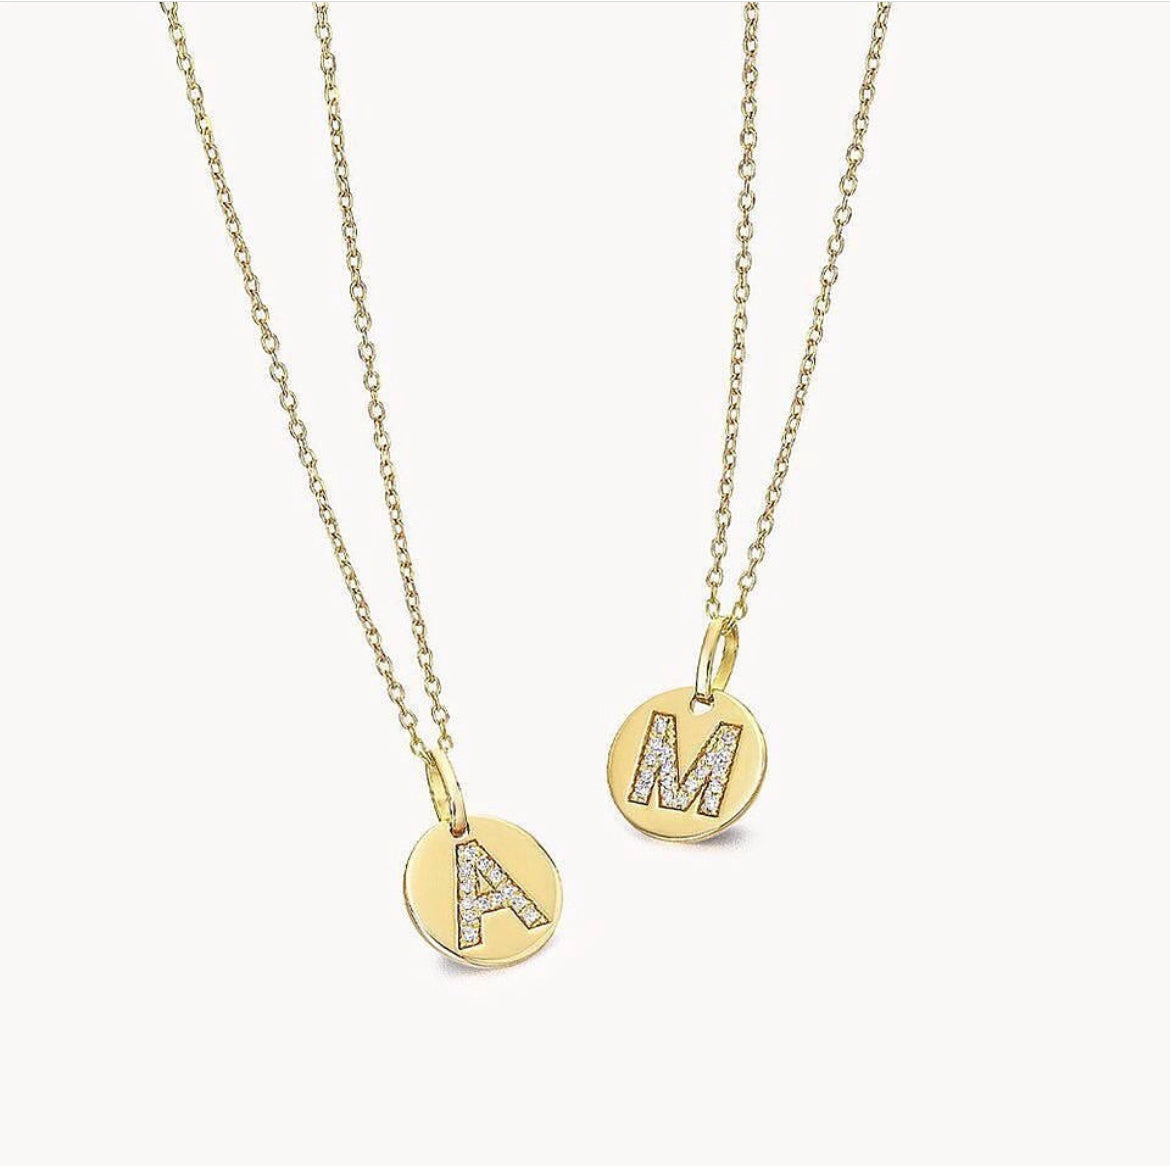 18ct Gold My Way Letter Necklace - 9mm Diamond Disc - John Ross Jewellers